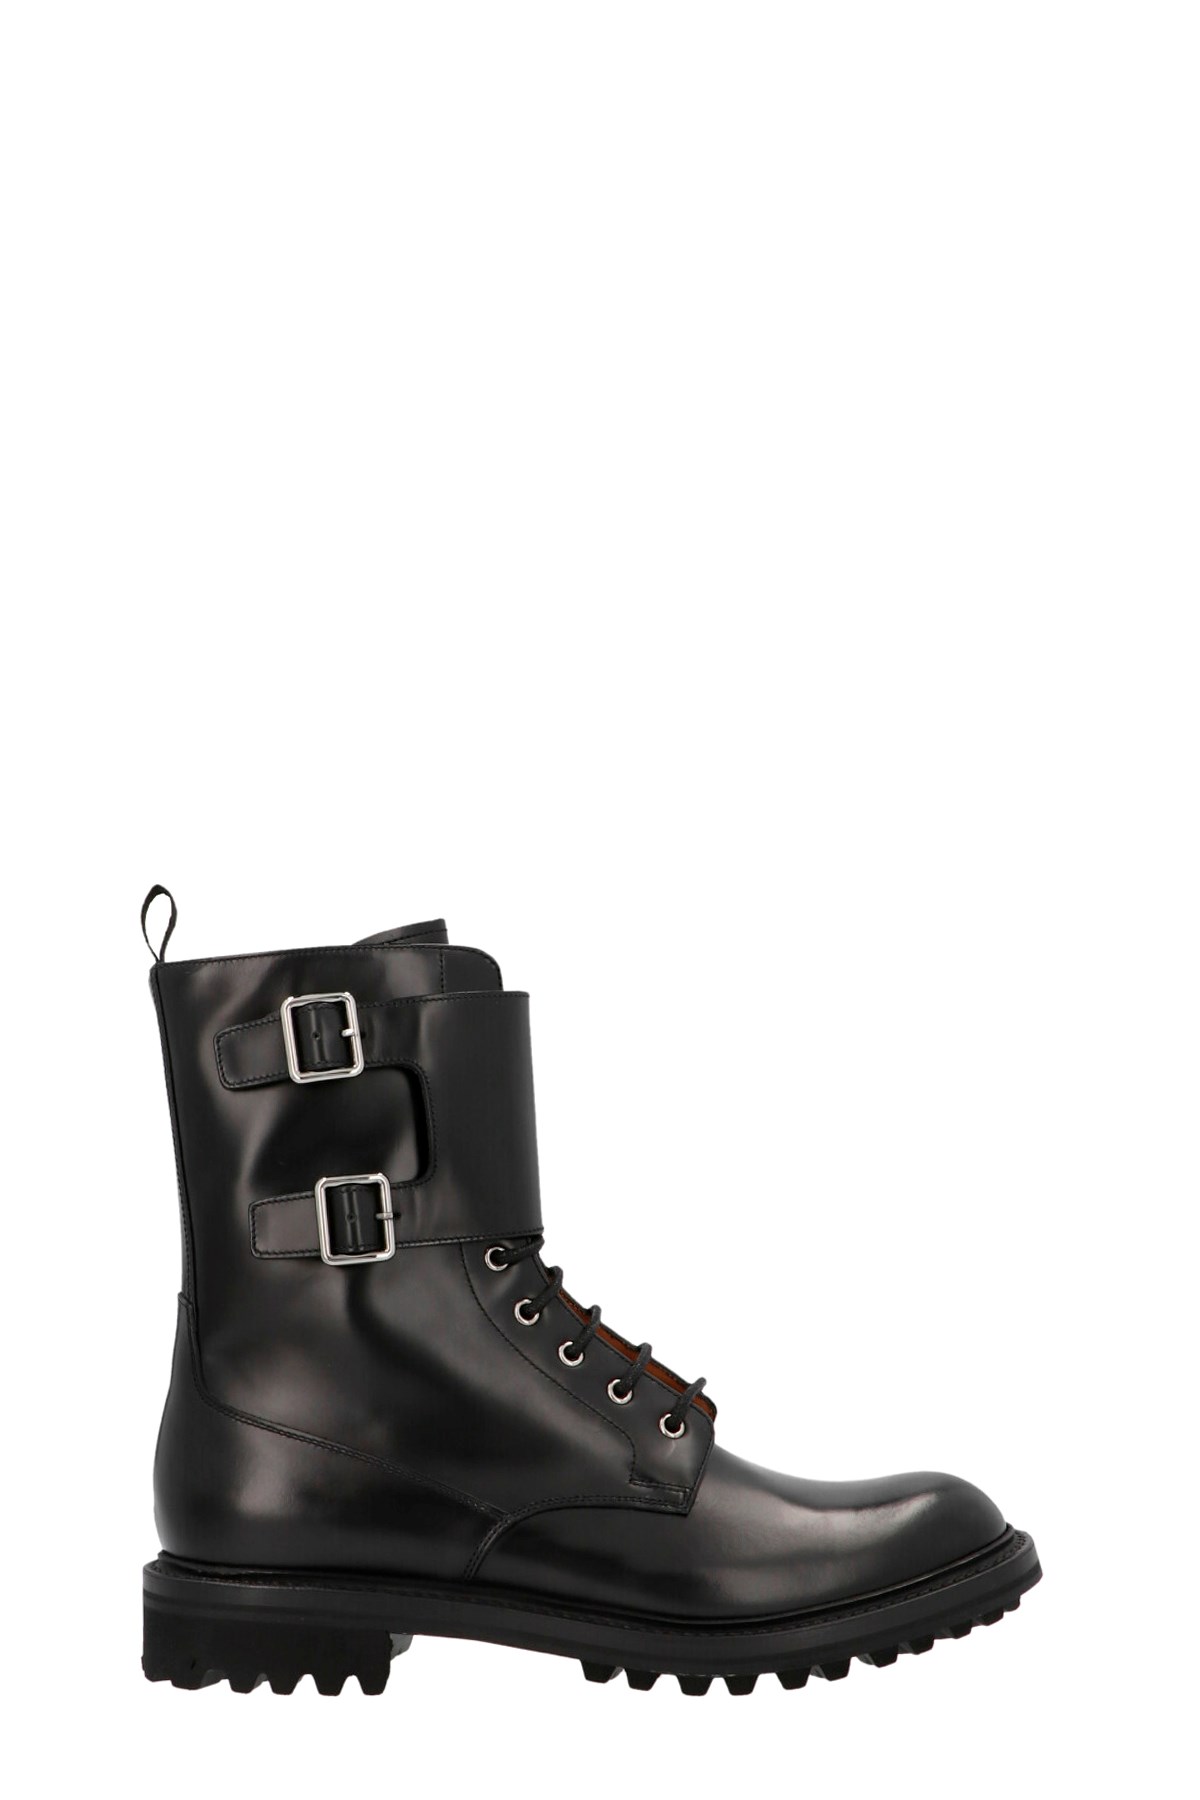 CHURCH'S 'Carly Lw’ Combat Boots